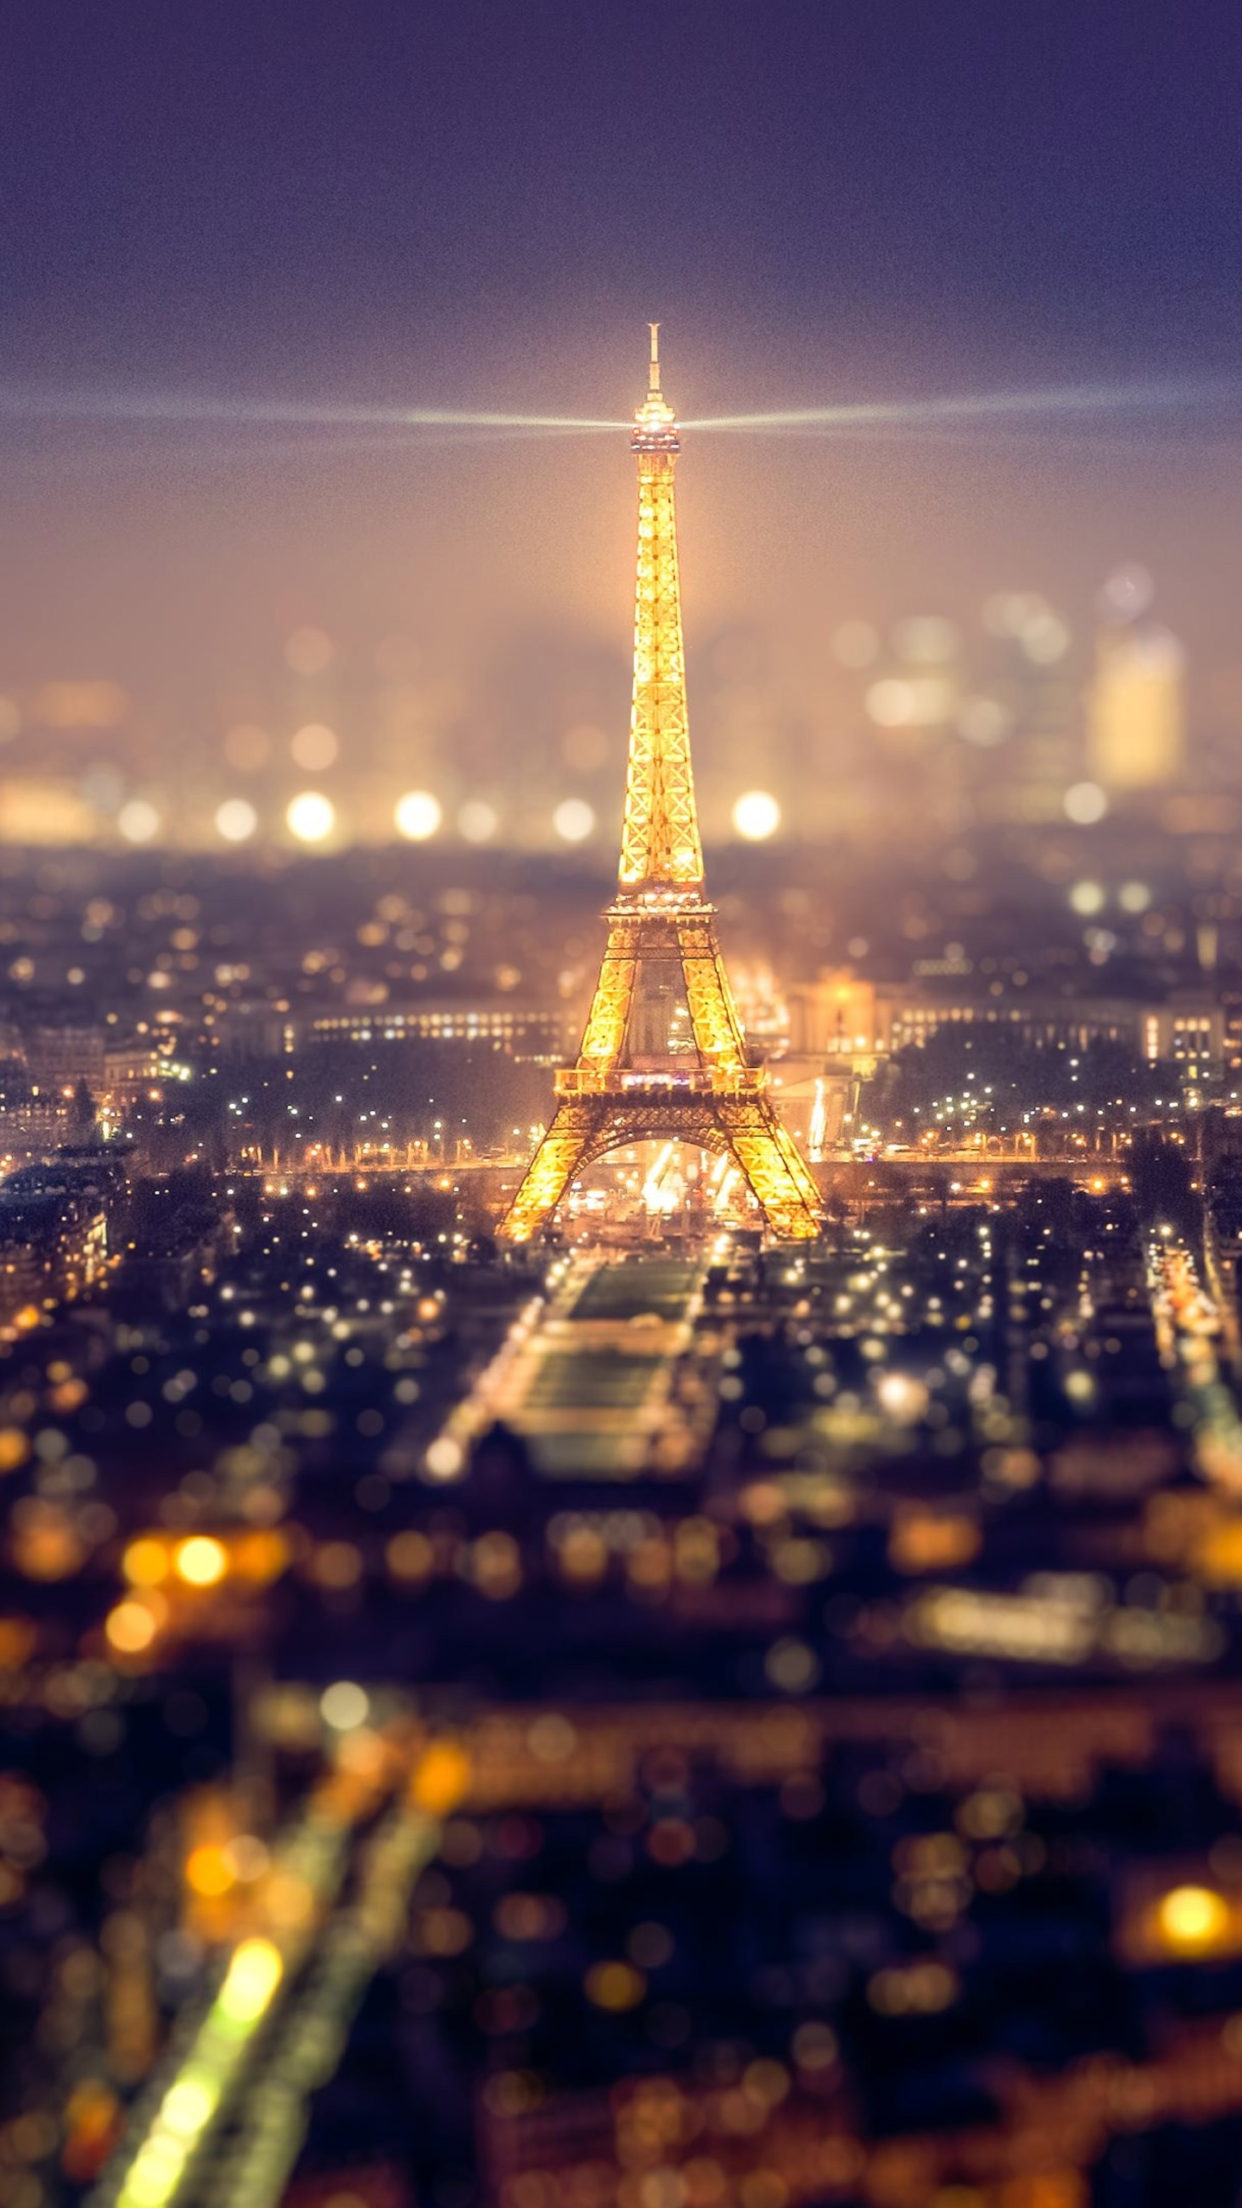 Paris At Night Amazing Backgrounds – HD Wallpapers Backgrounds Desktop, iphone & Android Free Download